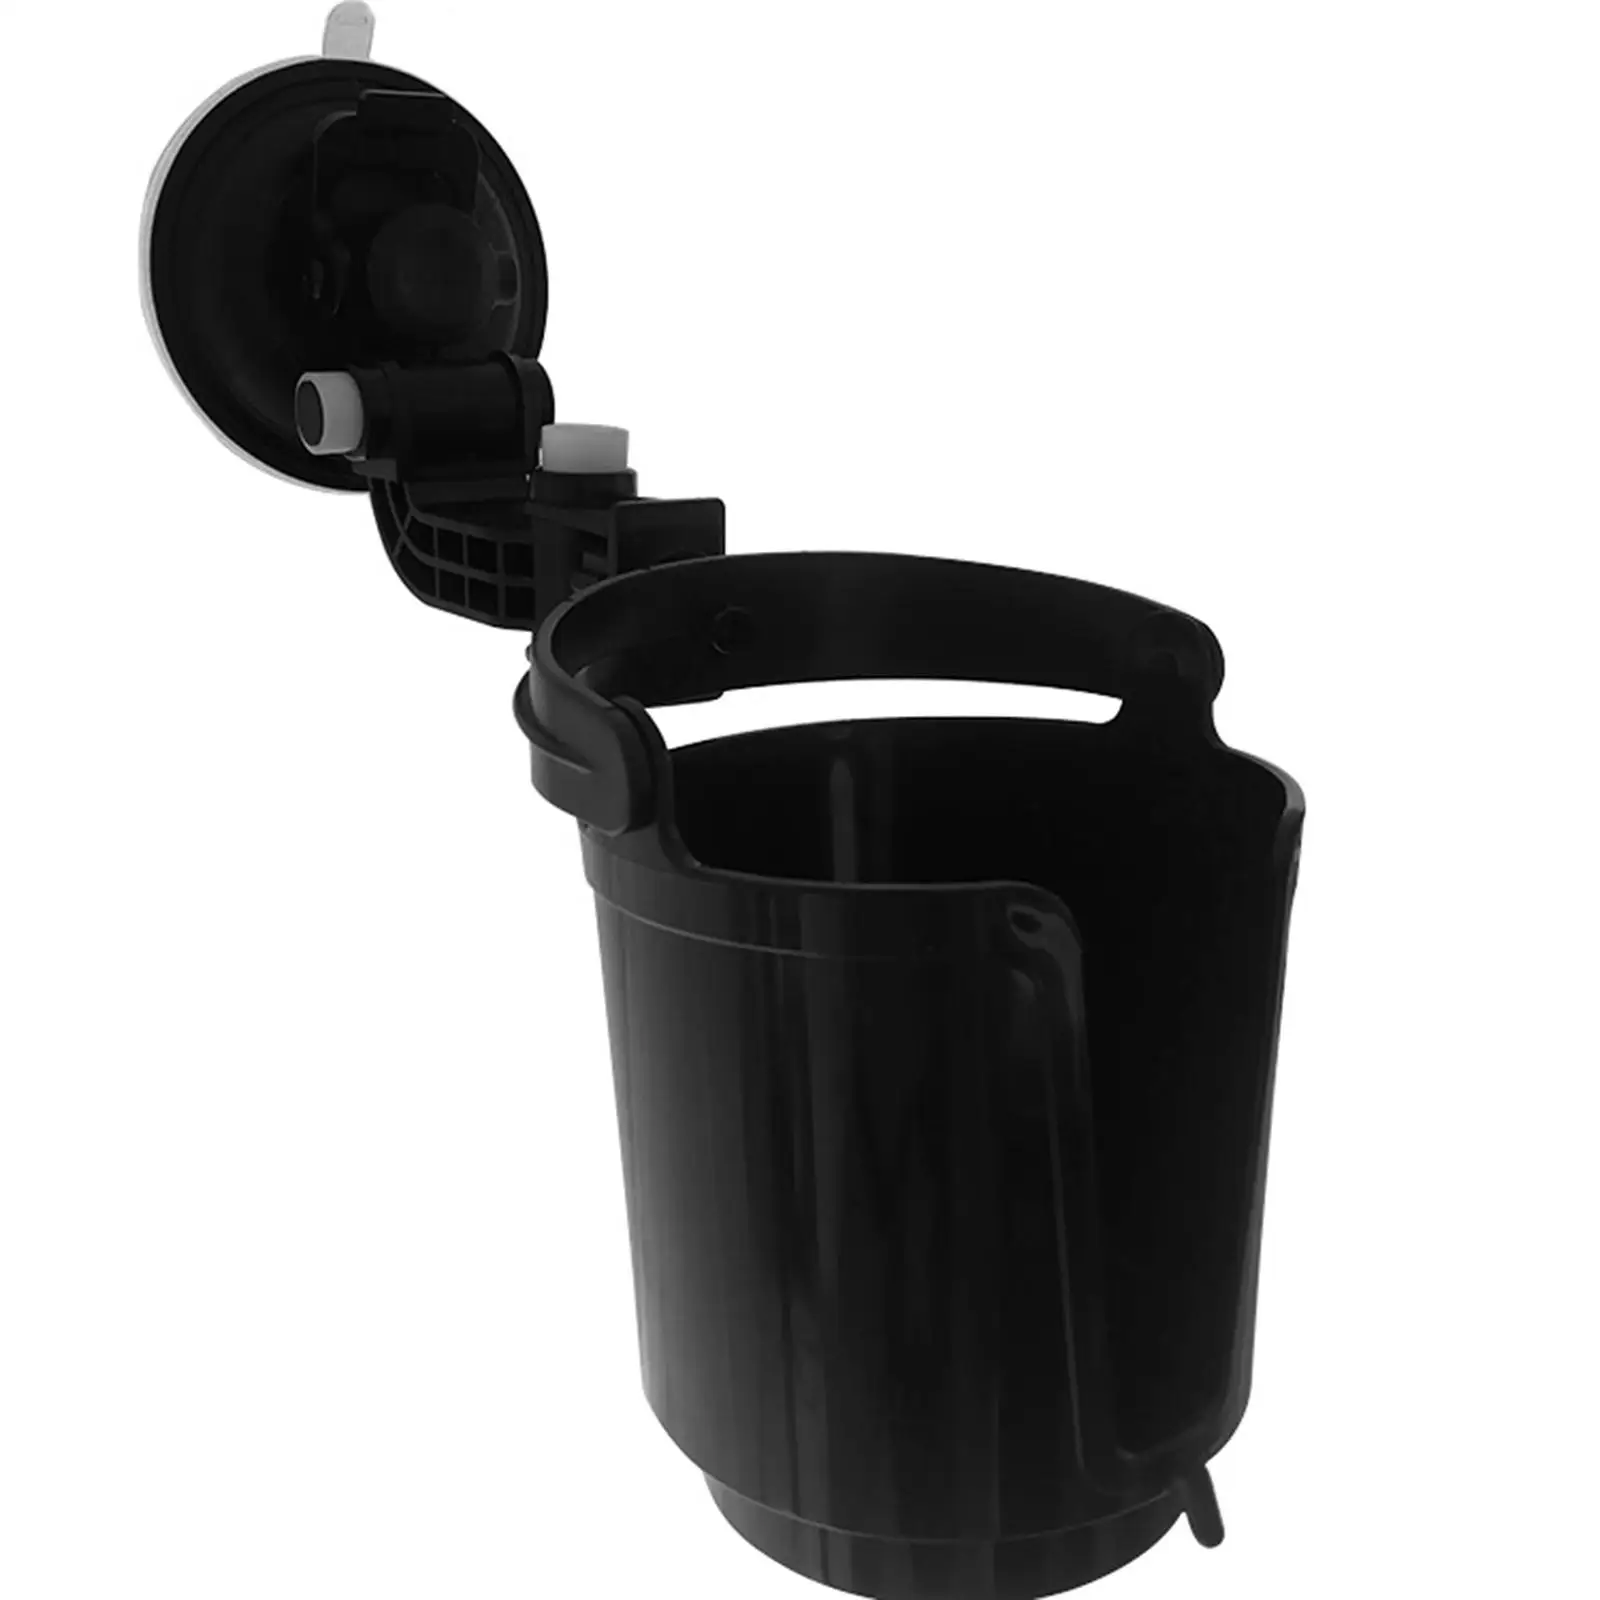 Cup Drink Holder Recessed Window Sturdy Console Adjustable Suction Insert Organizer for RV